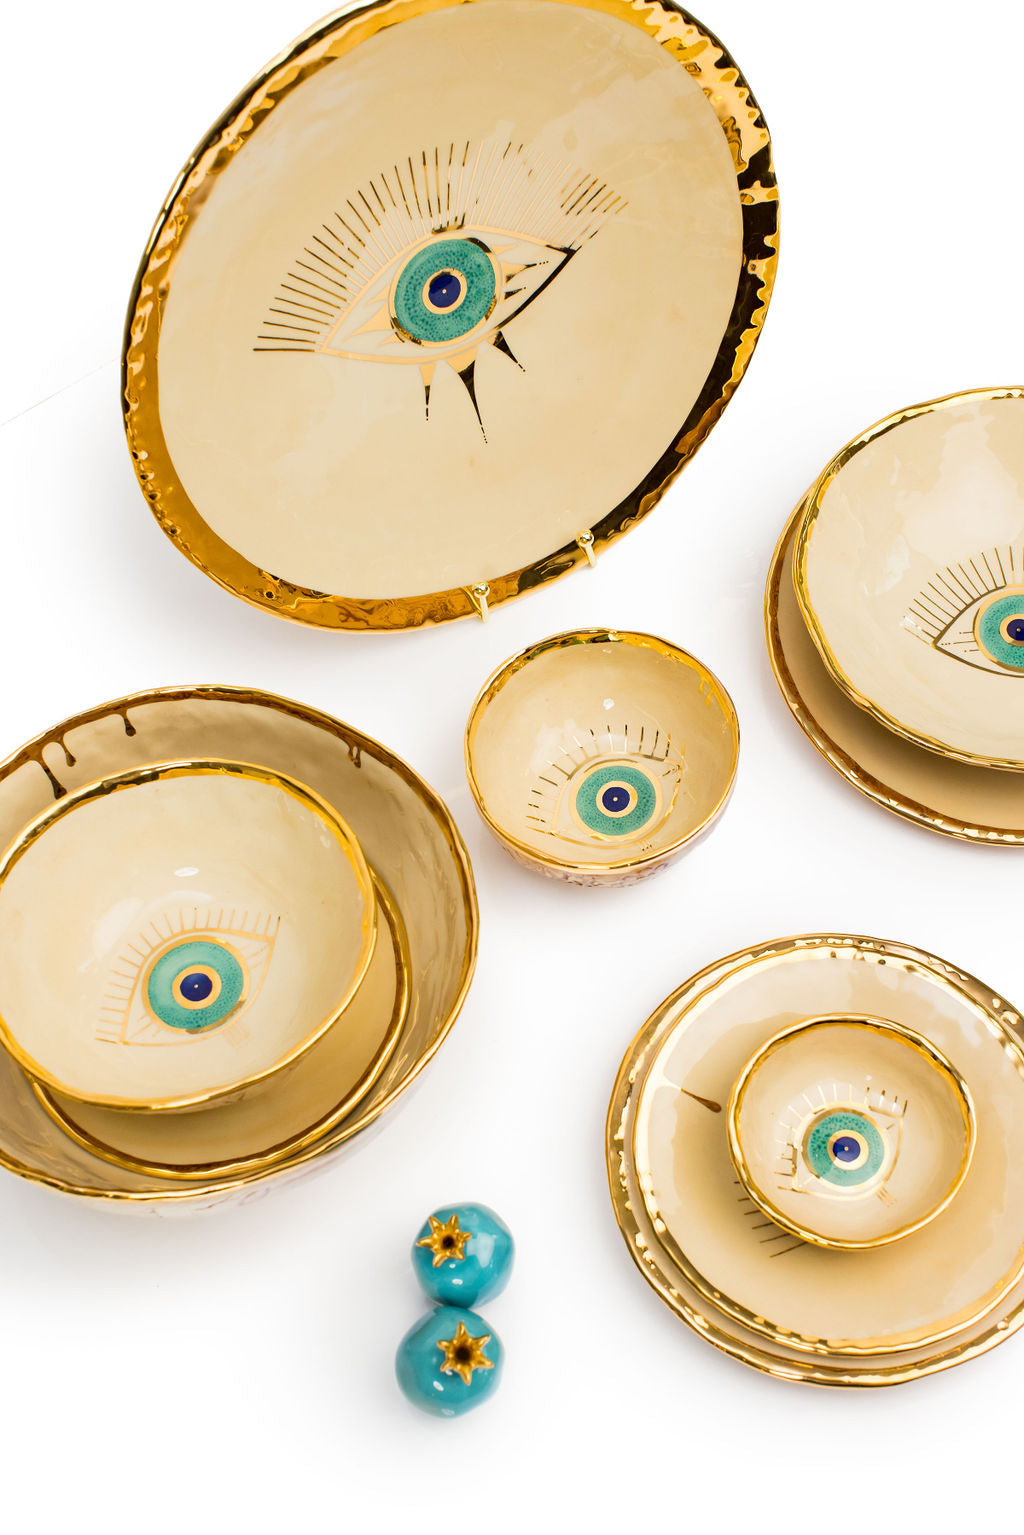 18K Gold Plated Bowls With Glazed Stamped Back